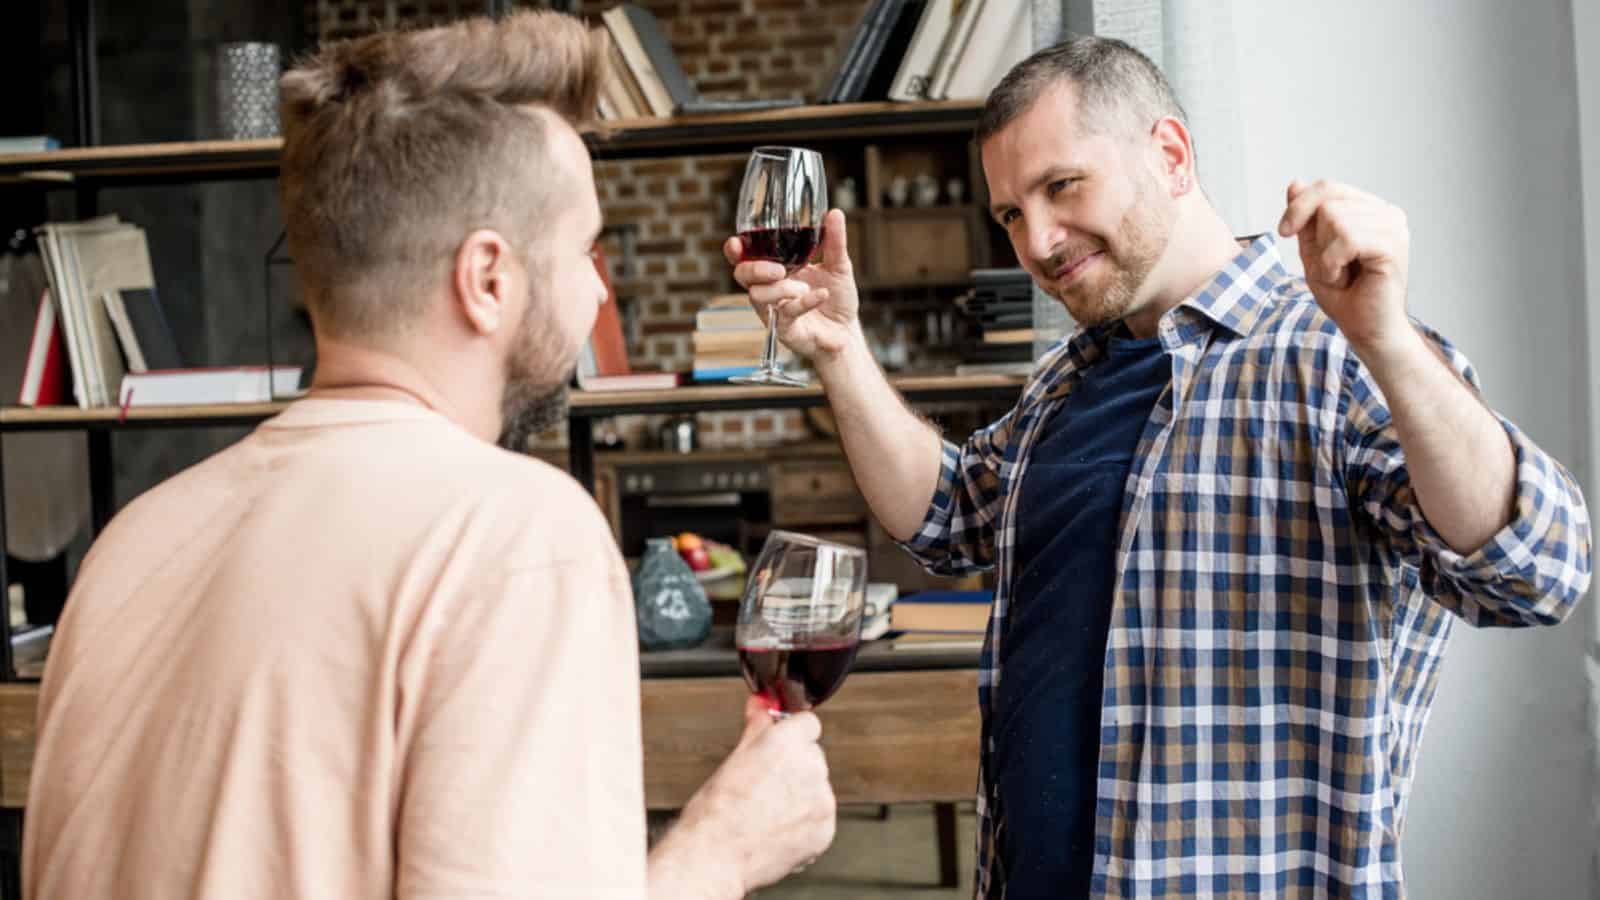 Homosexual couple talking and drinking wine